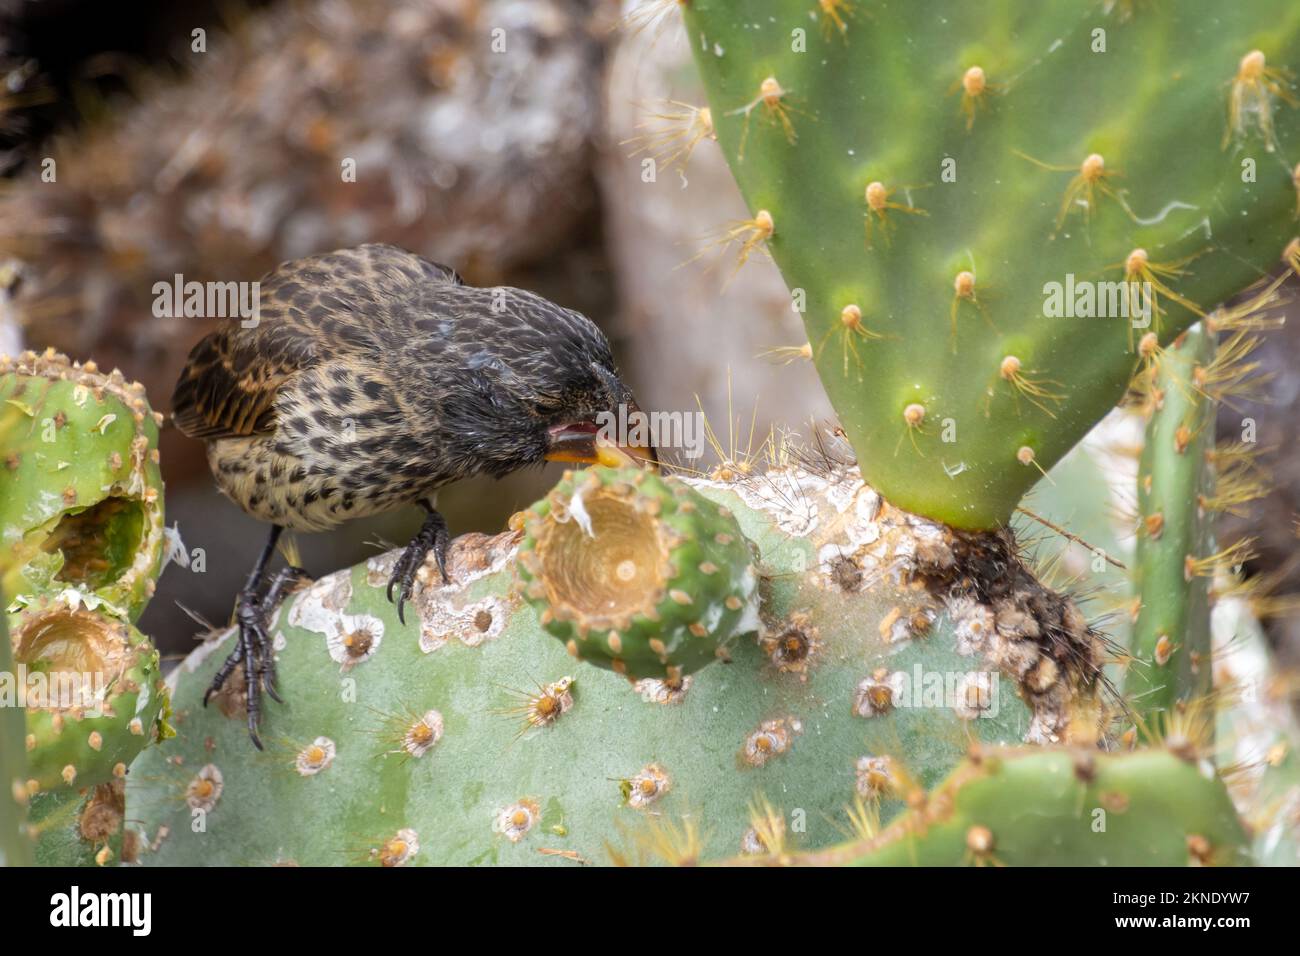 A cactus finch, eating on a cactus flower in the Galapagos National Park, Ecuador. Stock Photo